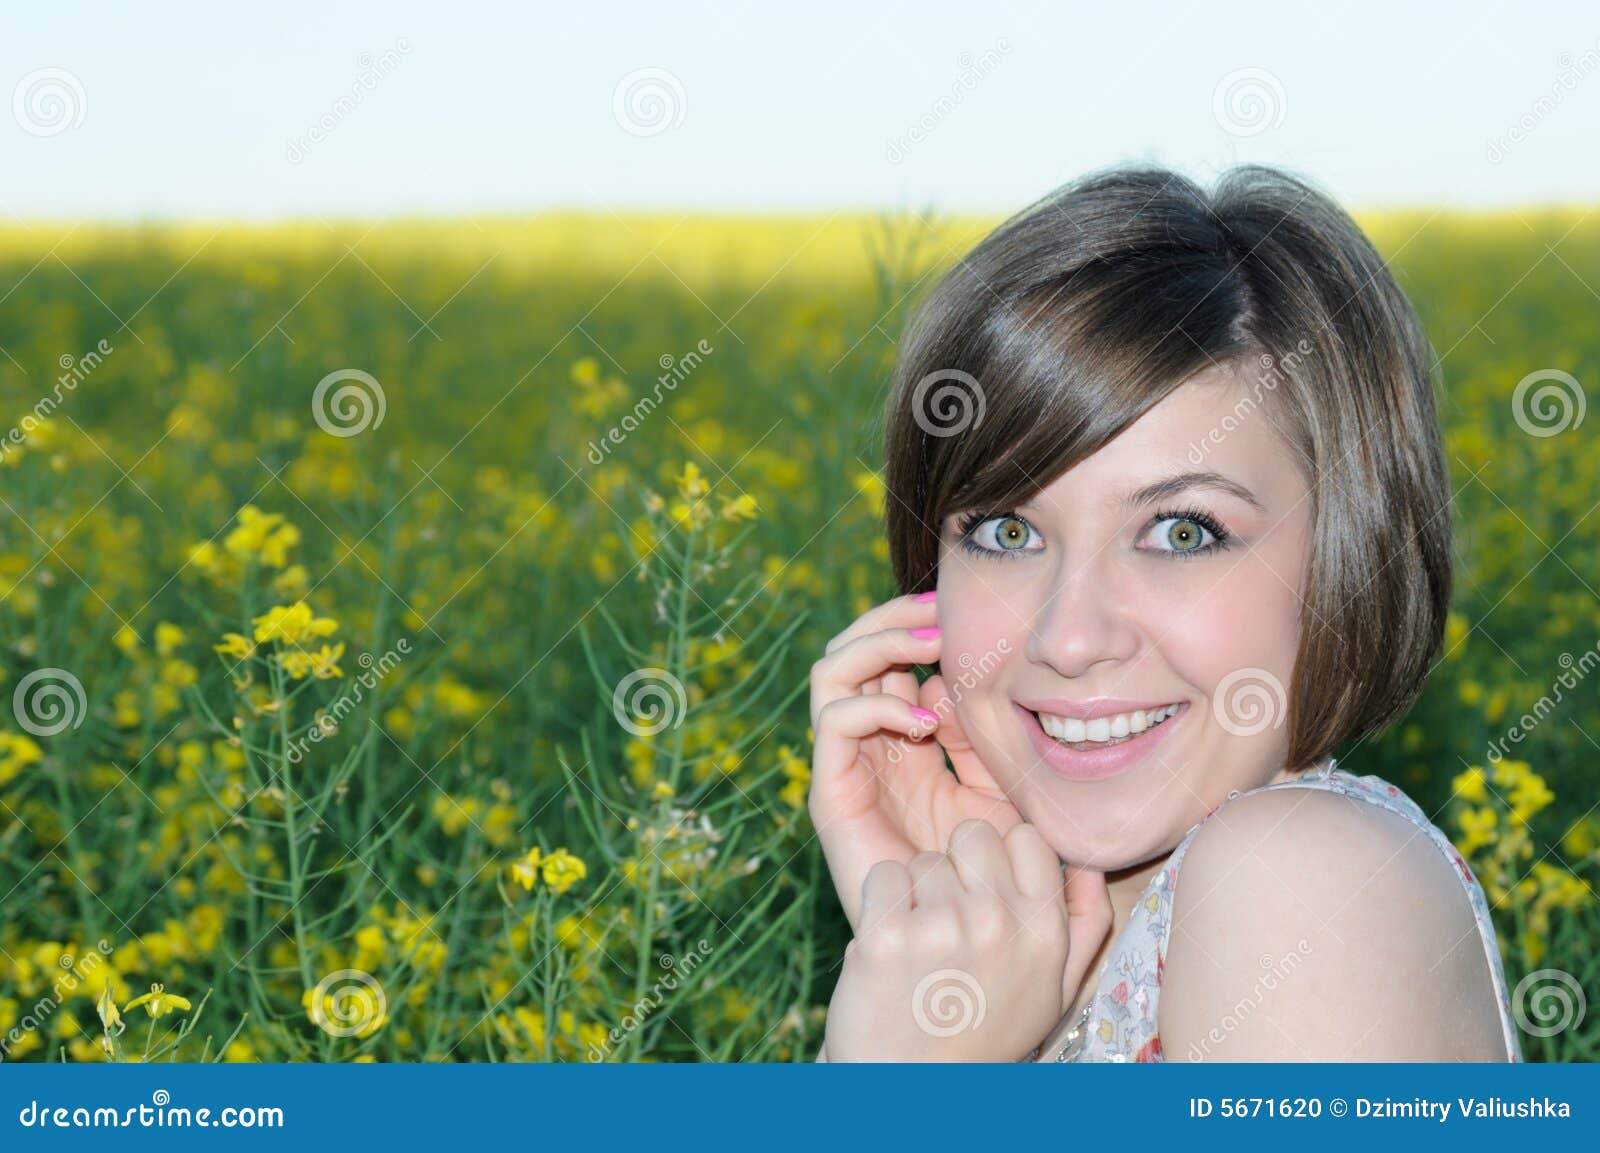 portrait of the beauty girl on yellow meadow